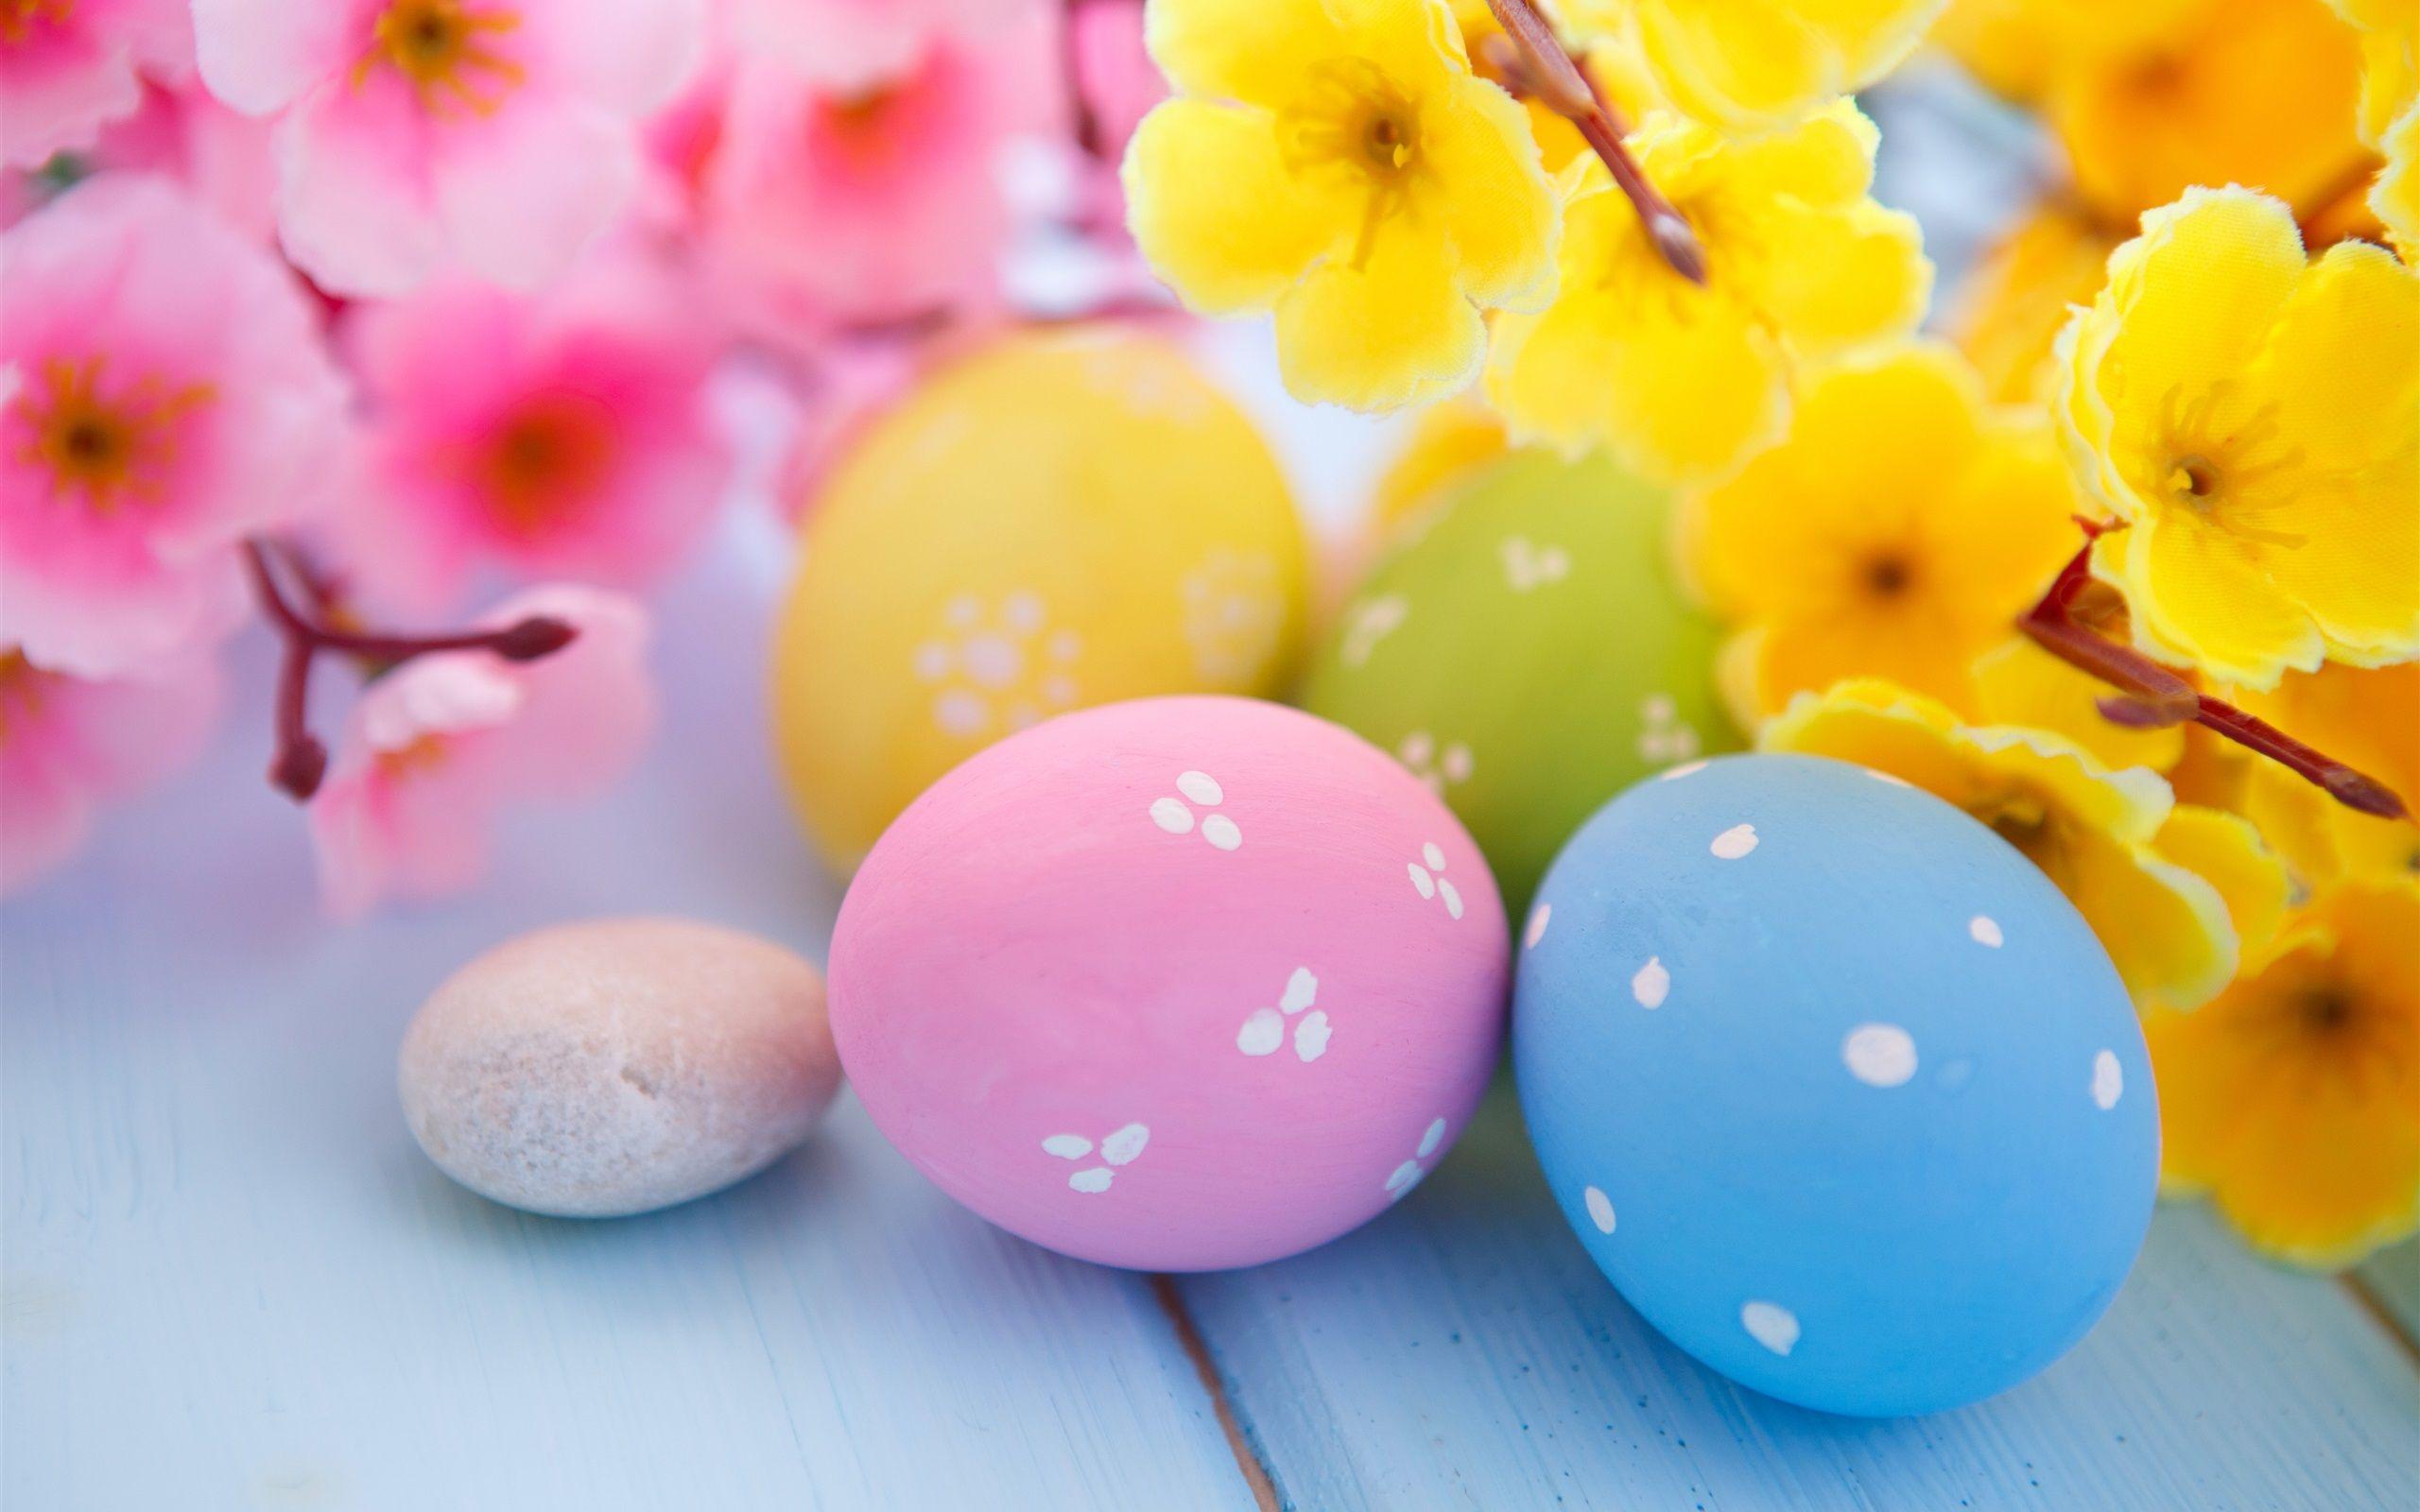 Easter Eggs and Spring Blossoms, HD Celebrations, 4k Wallpaper